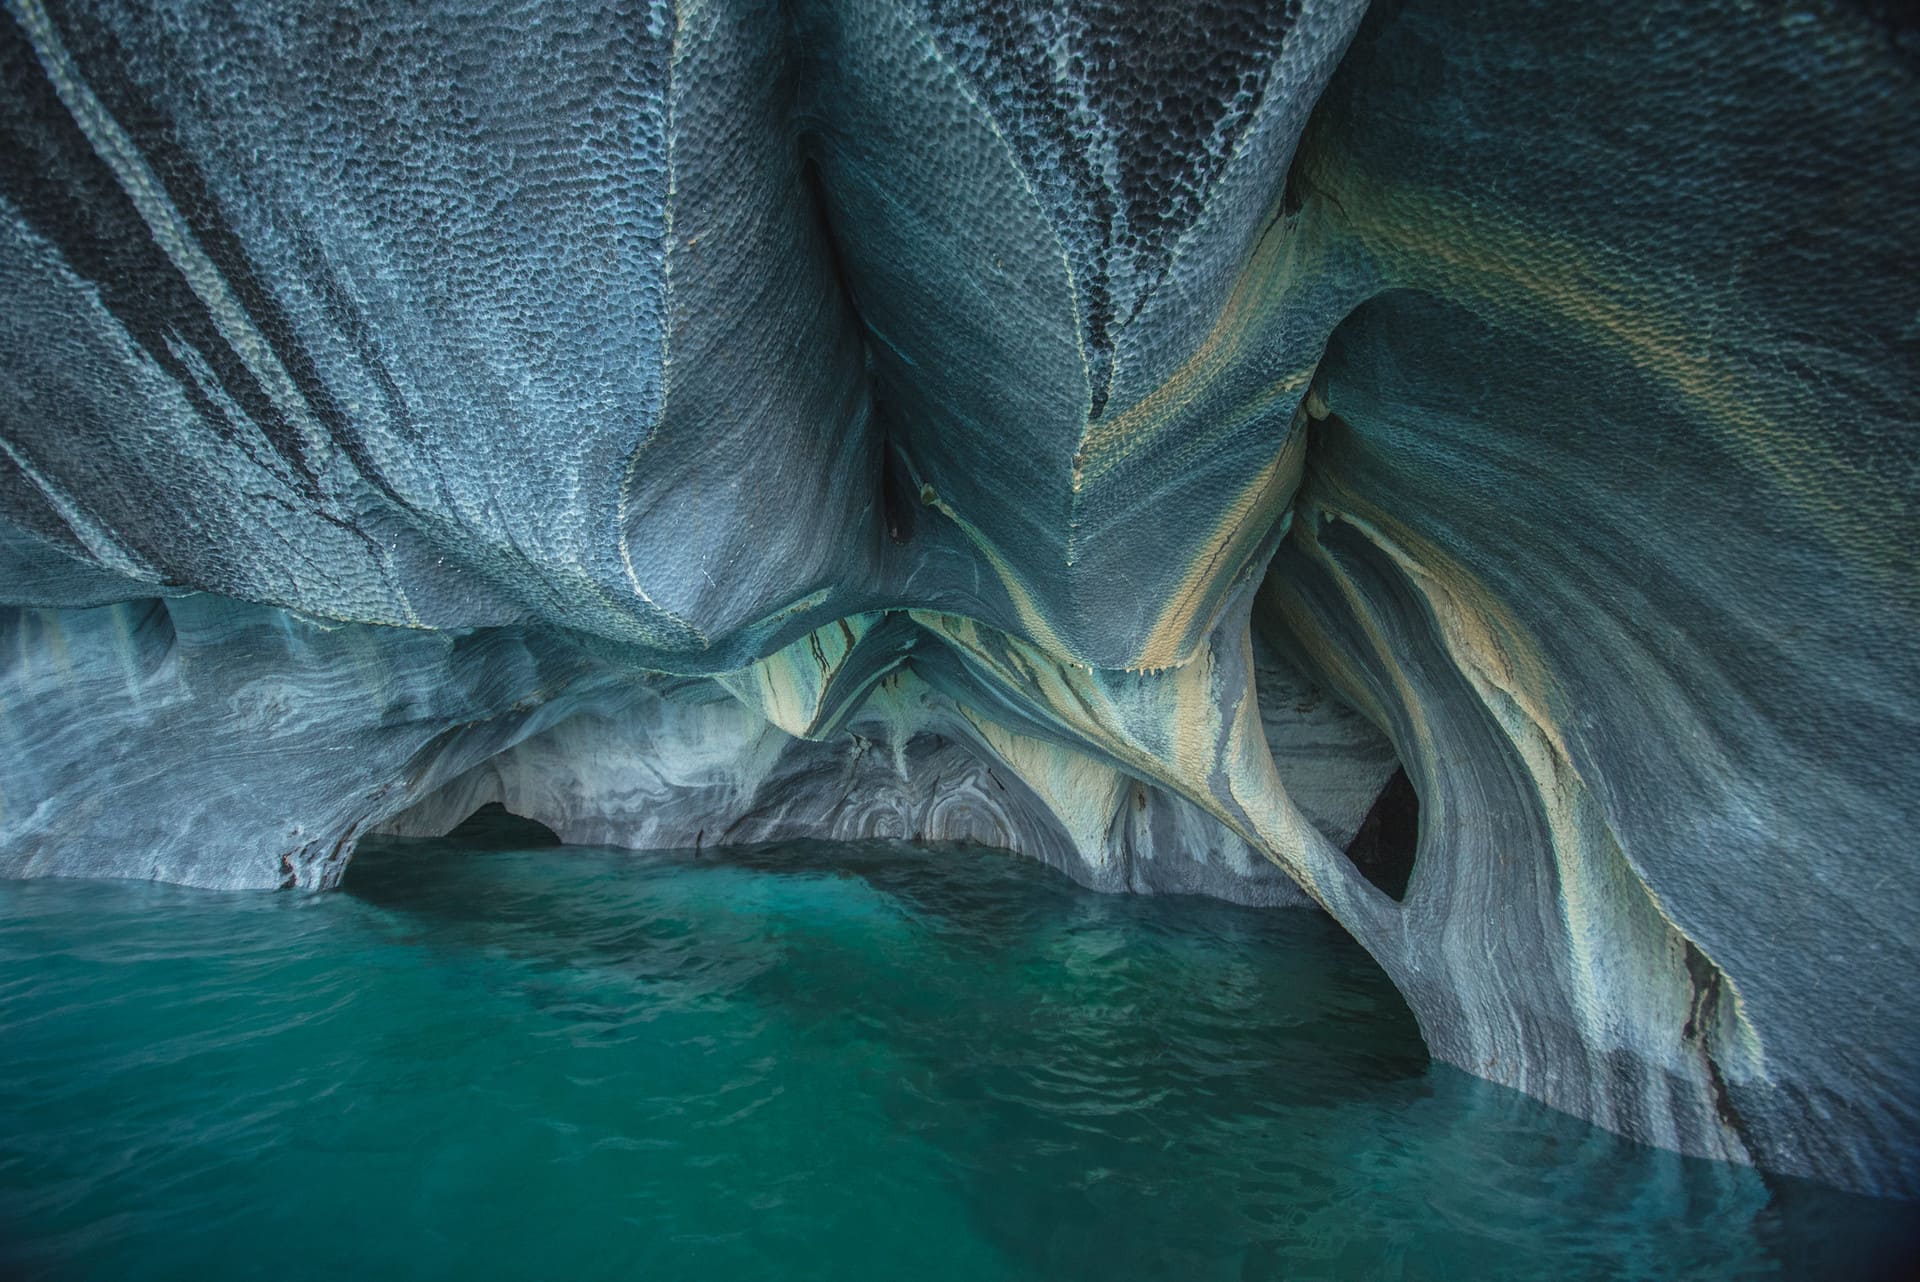 Marble Caves - Carretera Austral